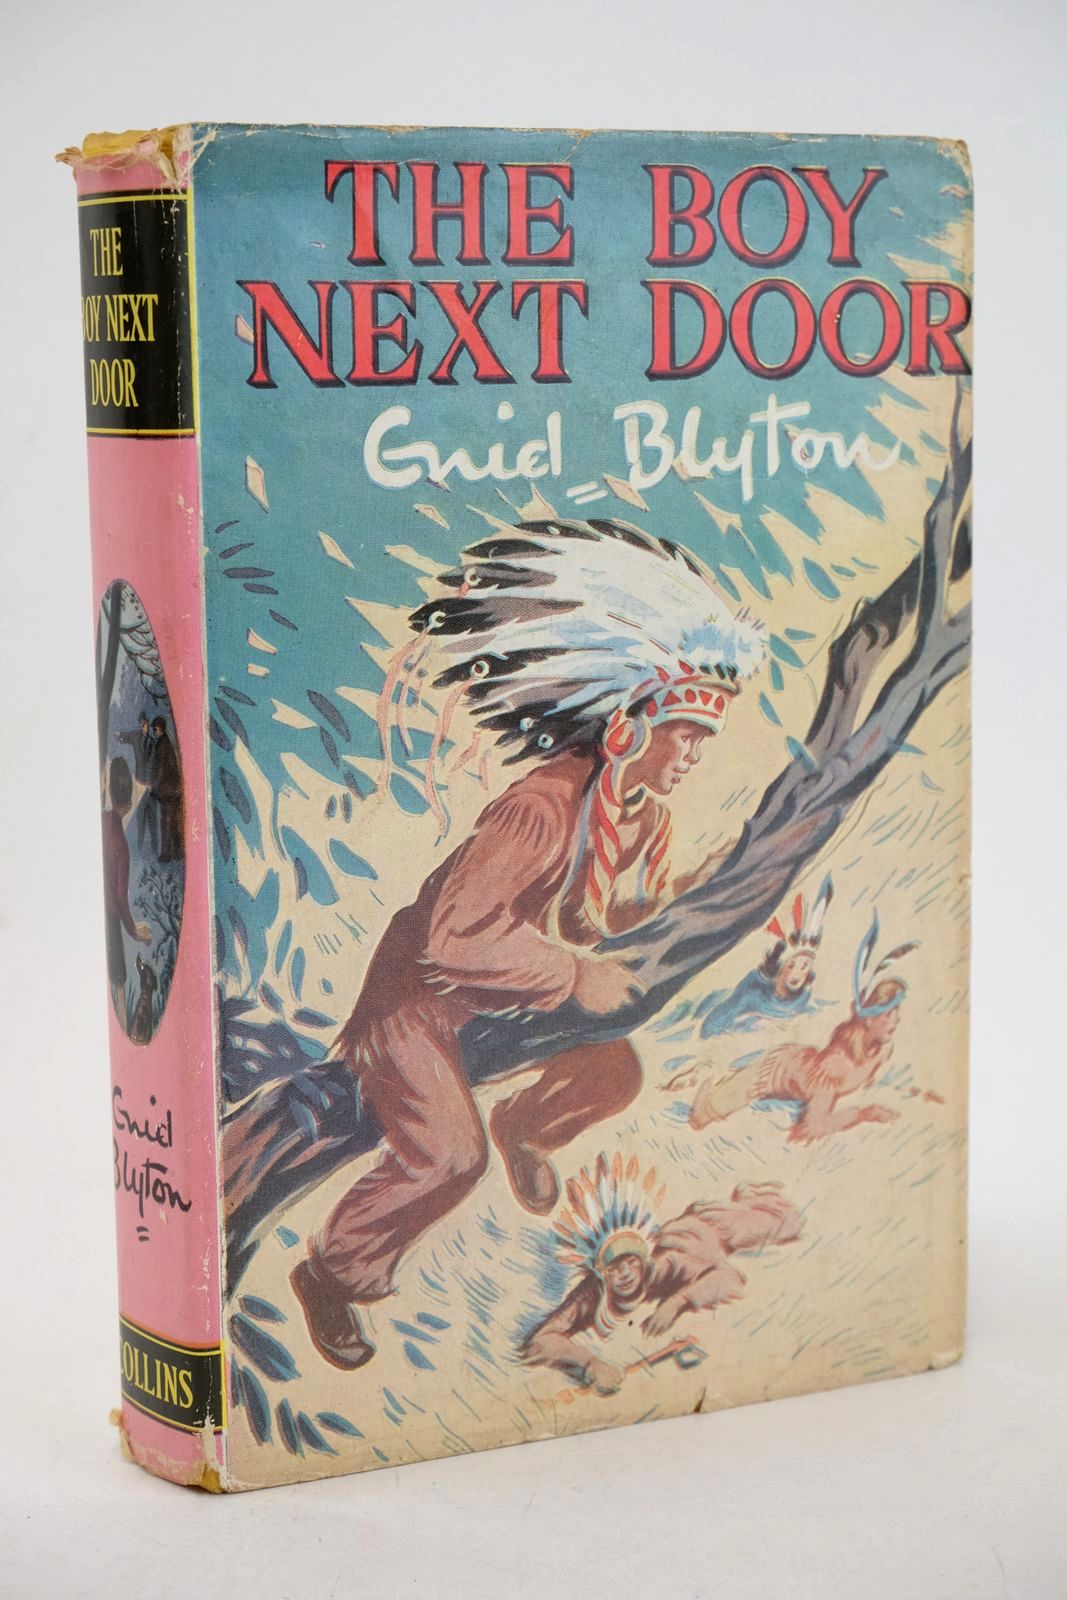 Photo of THE BOY NEXT DOOR written by Blyton, Enid illustrated by Dunlop, Gilbert published by Collins (STOCK CODE: 1326891)  for sale by Stella & Rose's Books